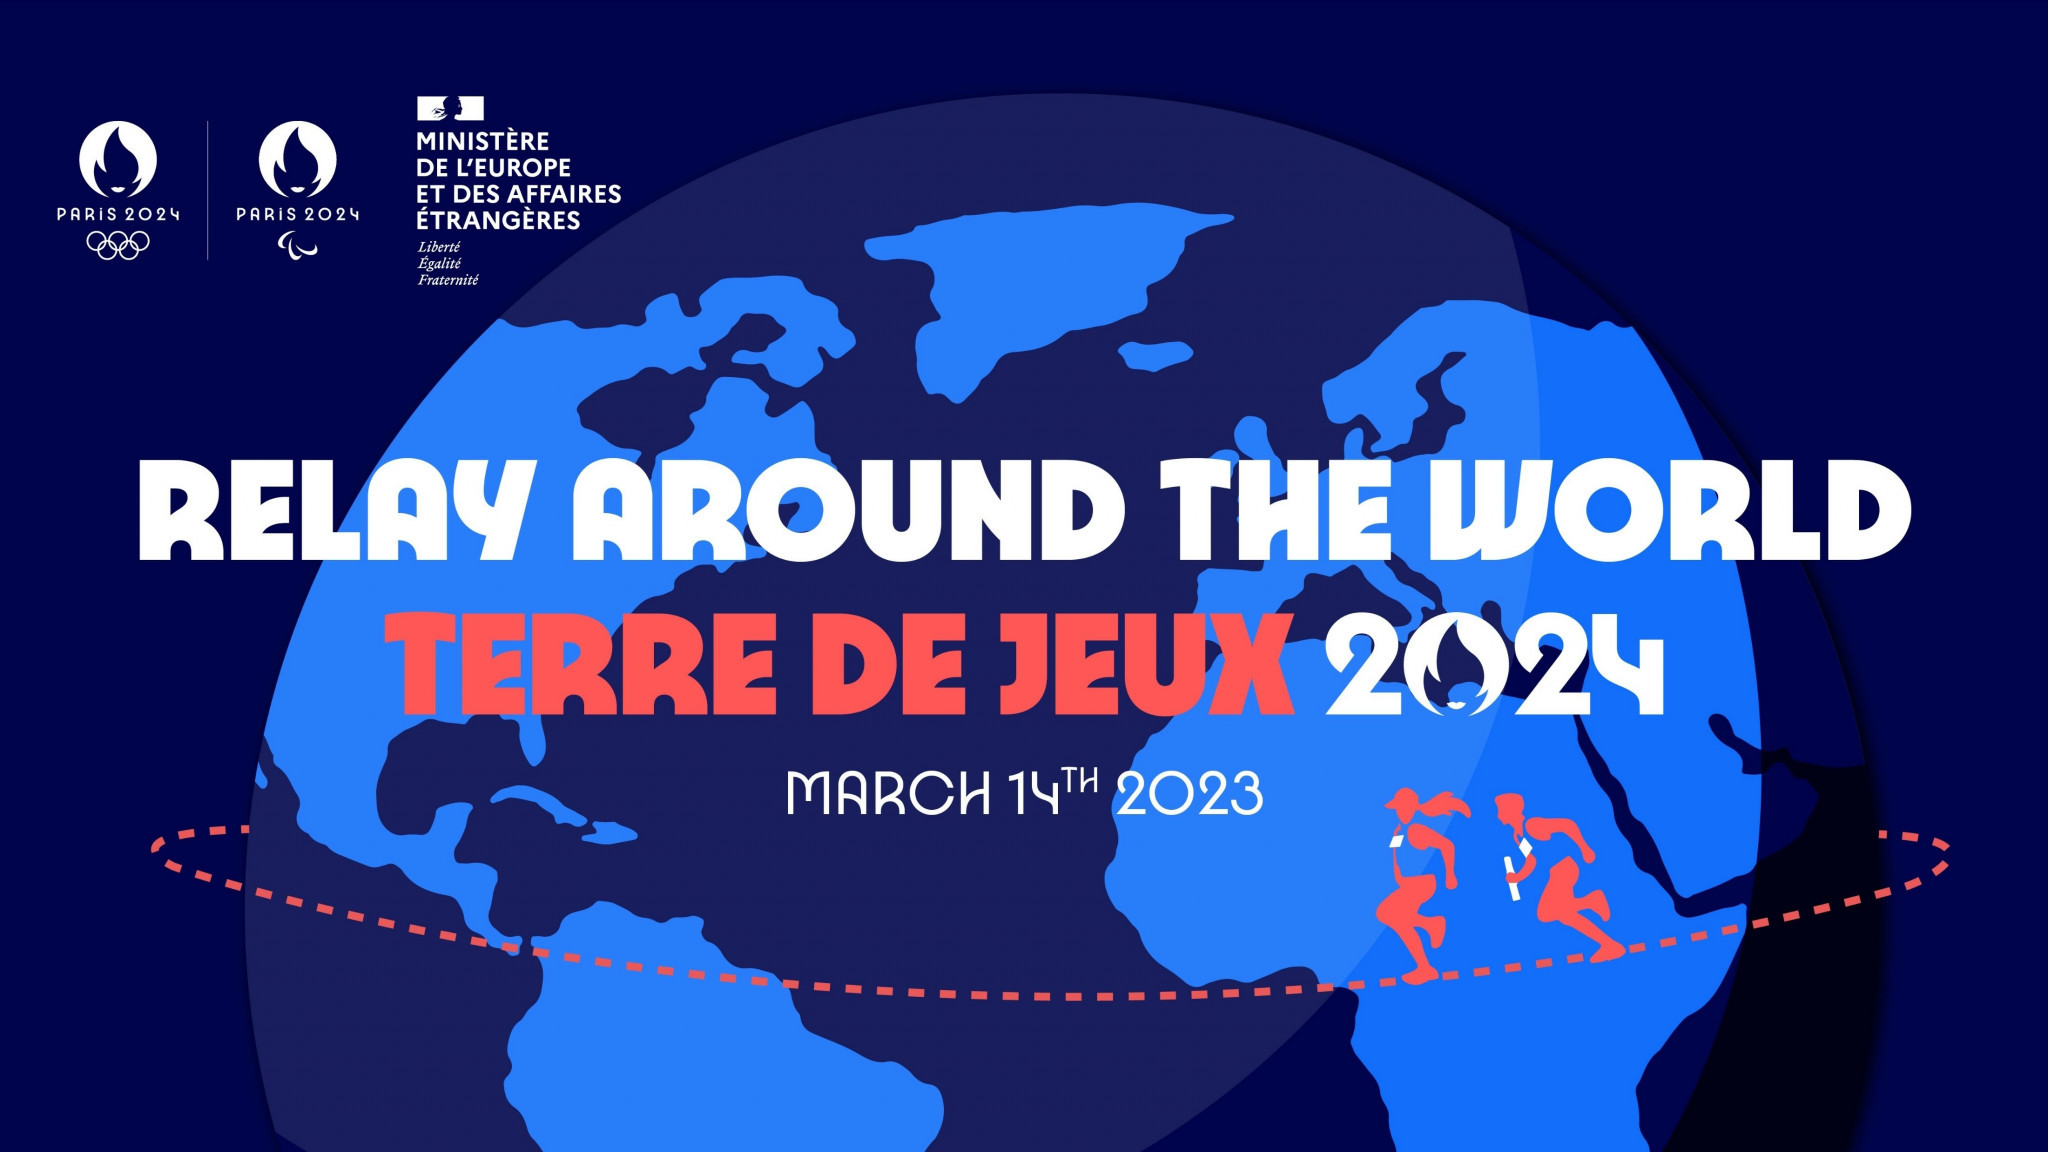 March 14 is set to mark 500 days until the start of the Paris 2024 Olympics, with a 24-hour Relay planned around the world ©Paris 2024